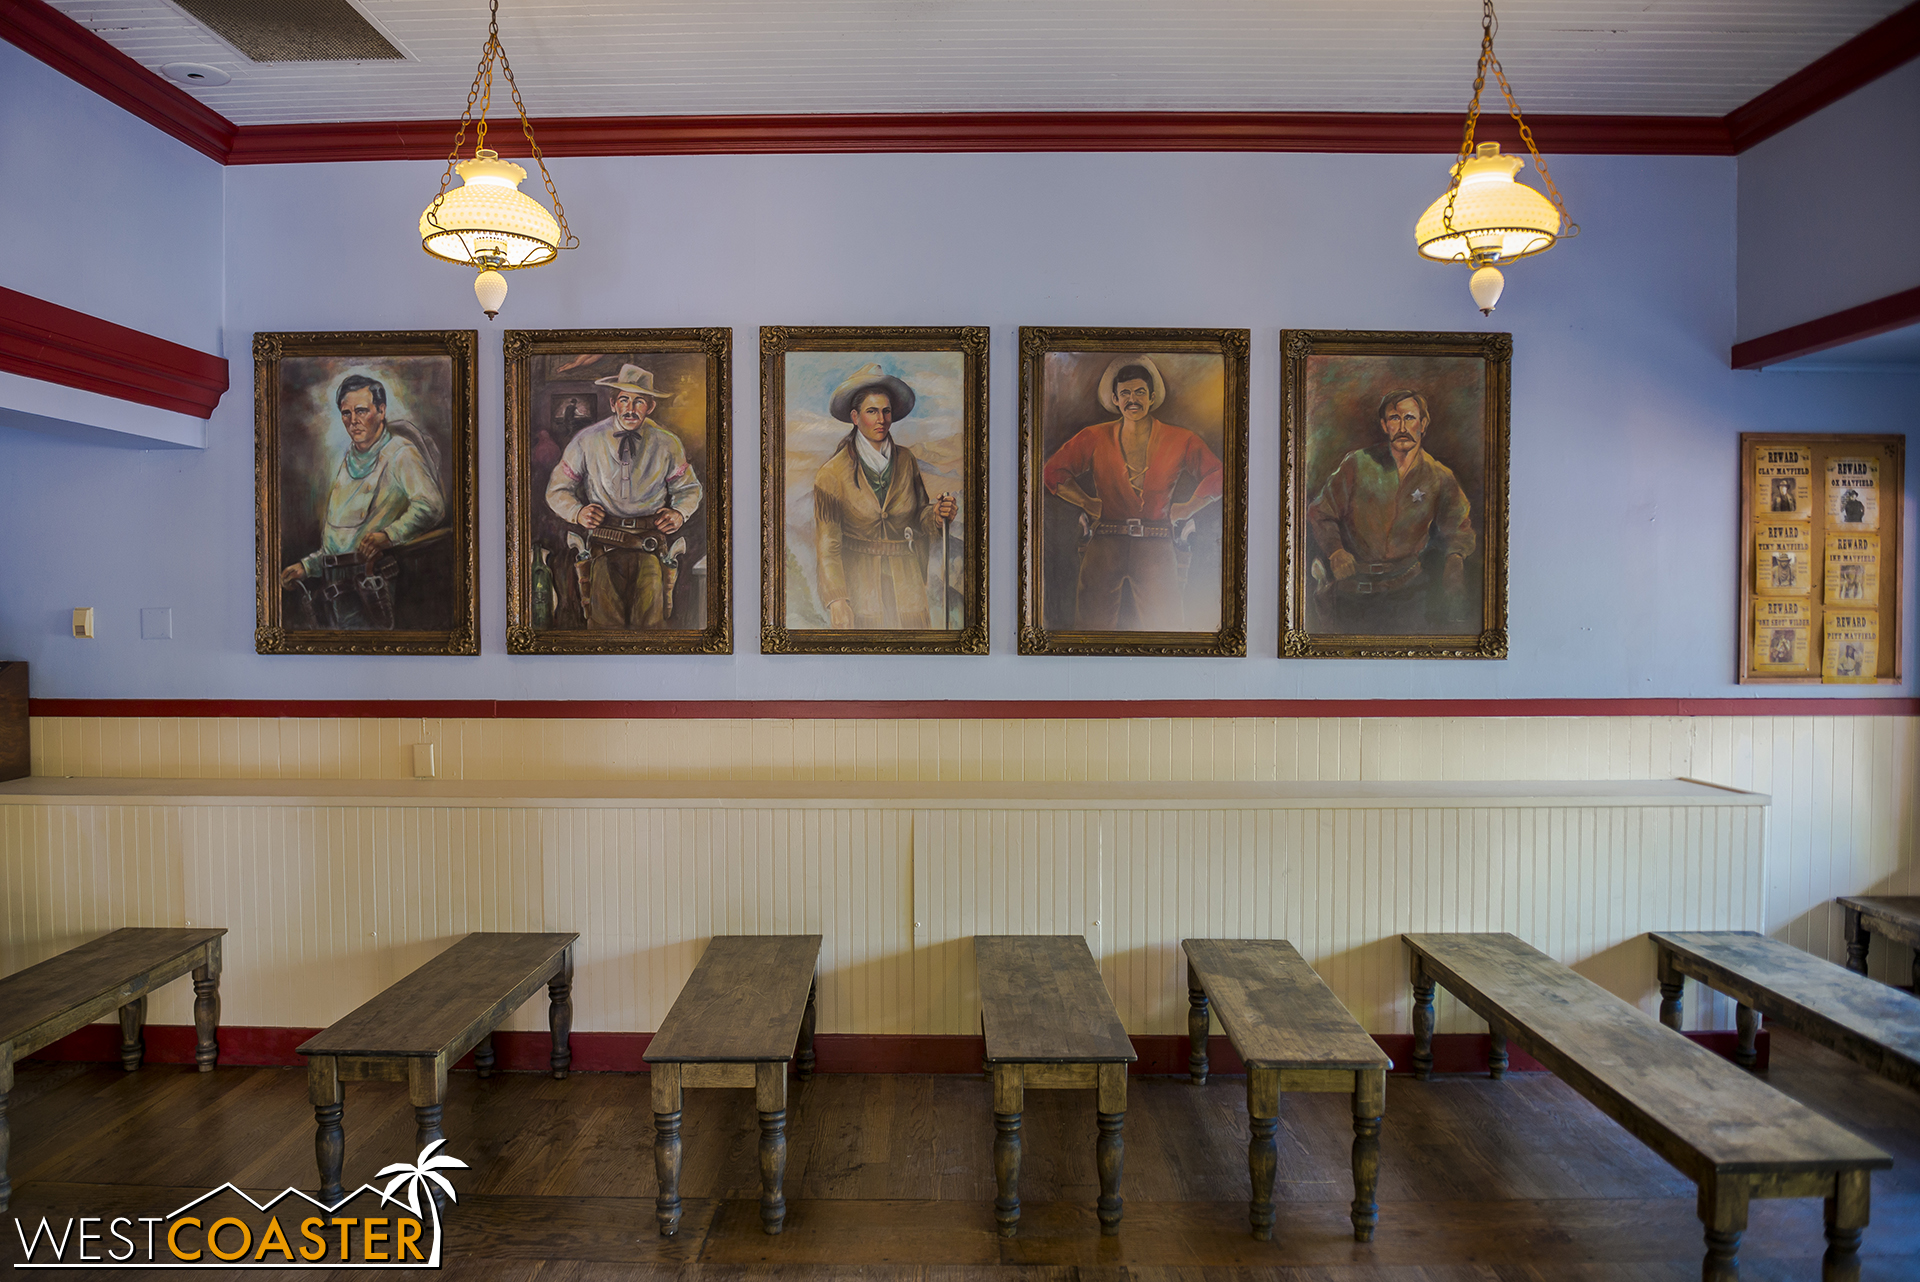  The room has been switched over from its Boysenberry Festival and has portraits of Calico's [fictitious] historical figures, including the matriarch of the Mayfield clan in the middle there. 